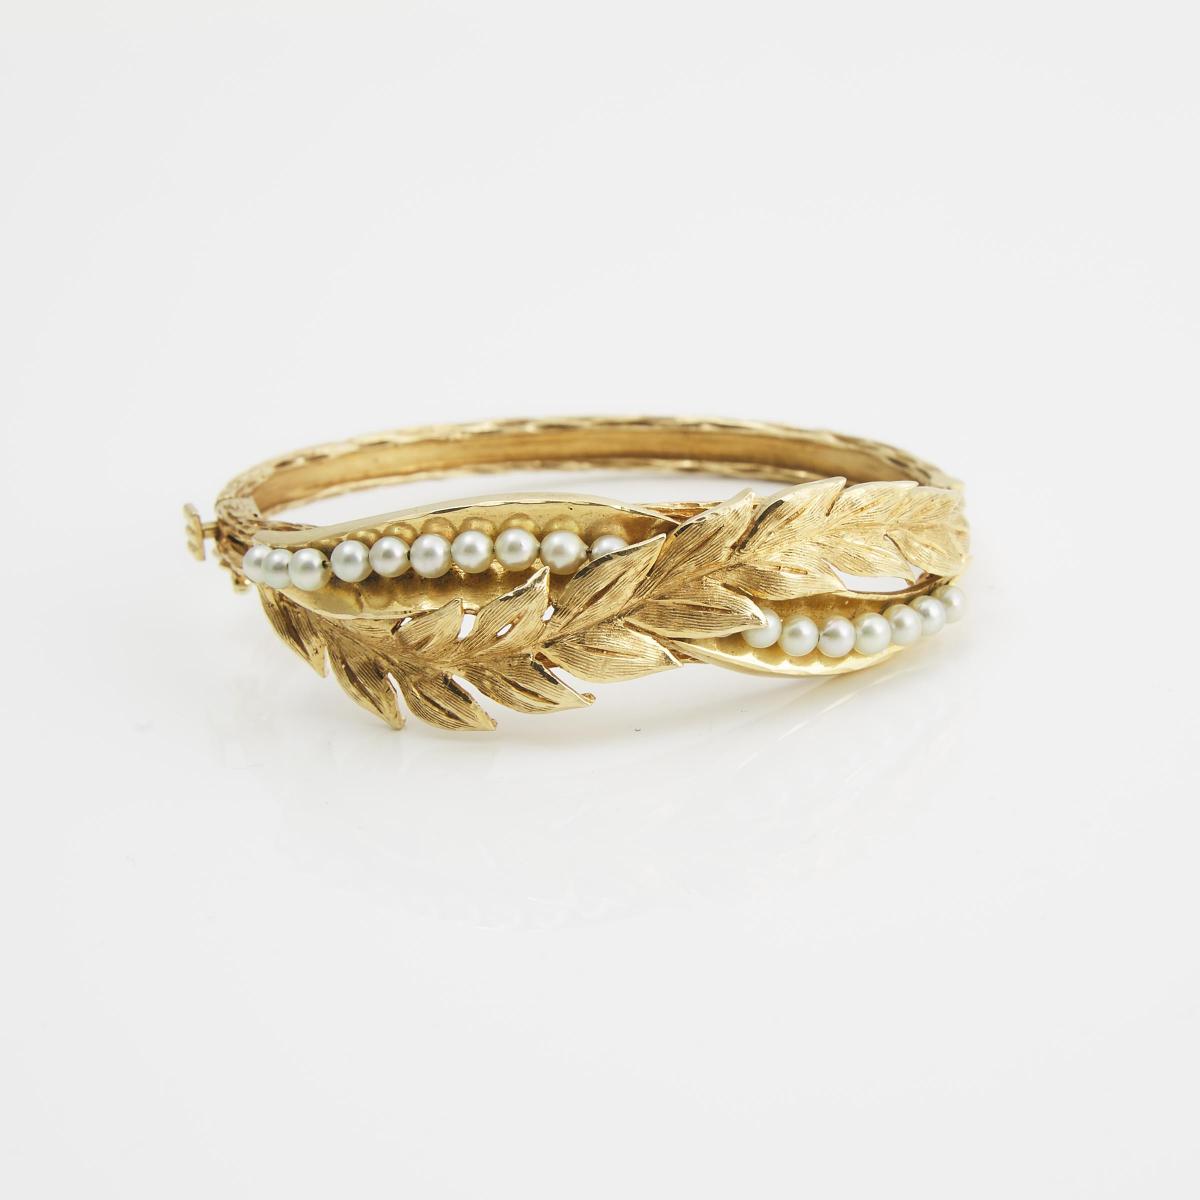 14k Yellow Gold Hinged Bangle, formed in a foliate motif and set with 18 small cultured pearls